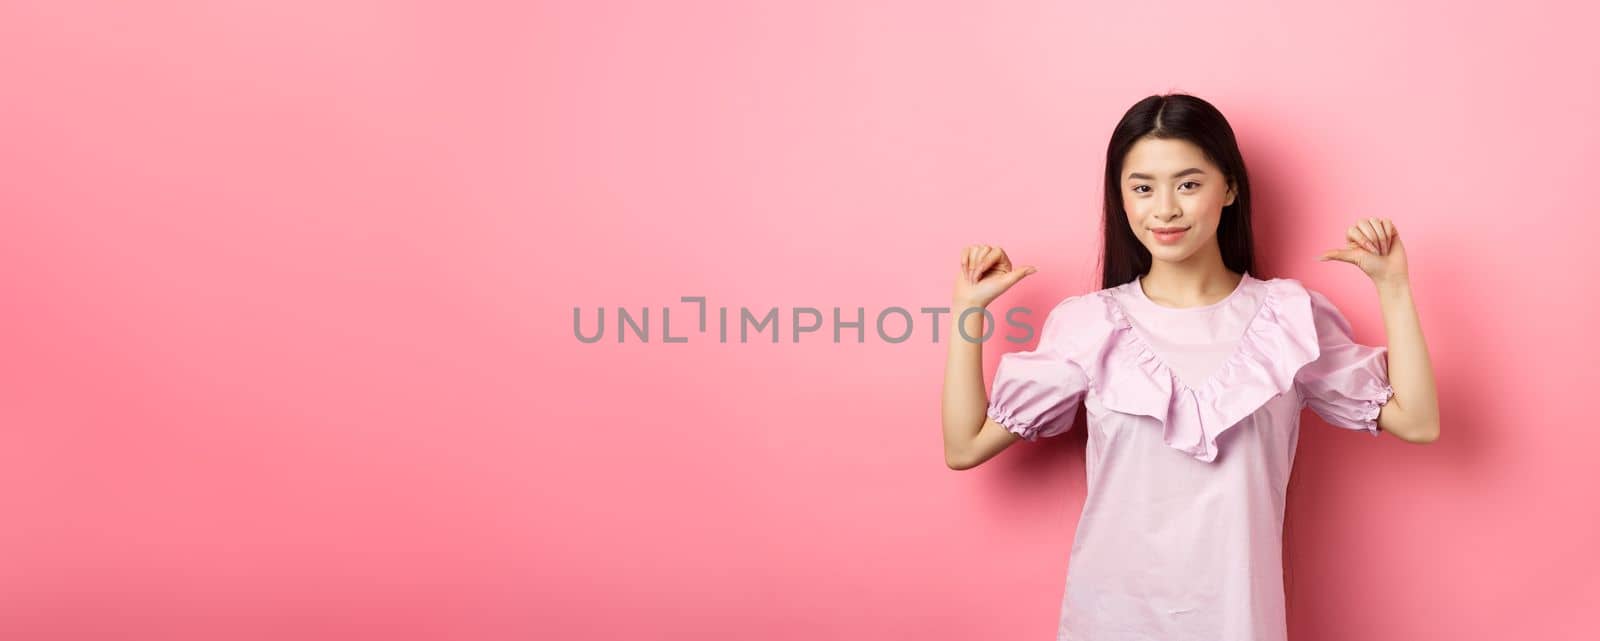 Confident asian girl smiling, pointing at herself, self-promoting personal achievements, standing in dress on pink background.